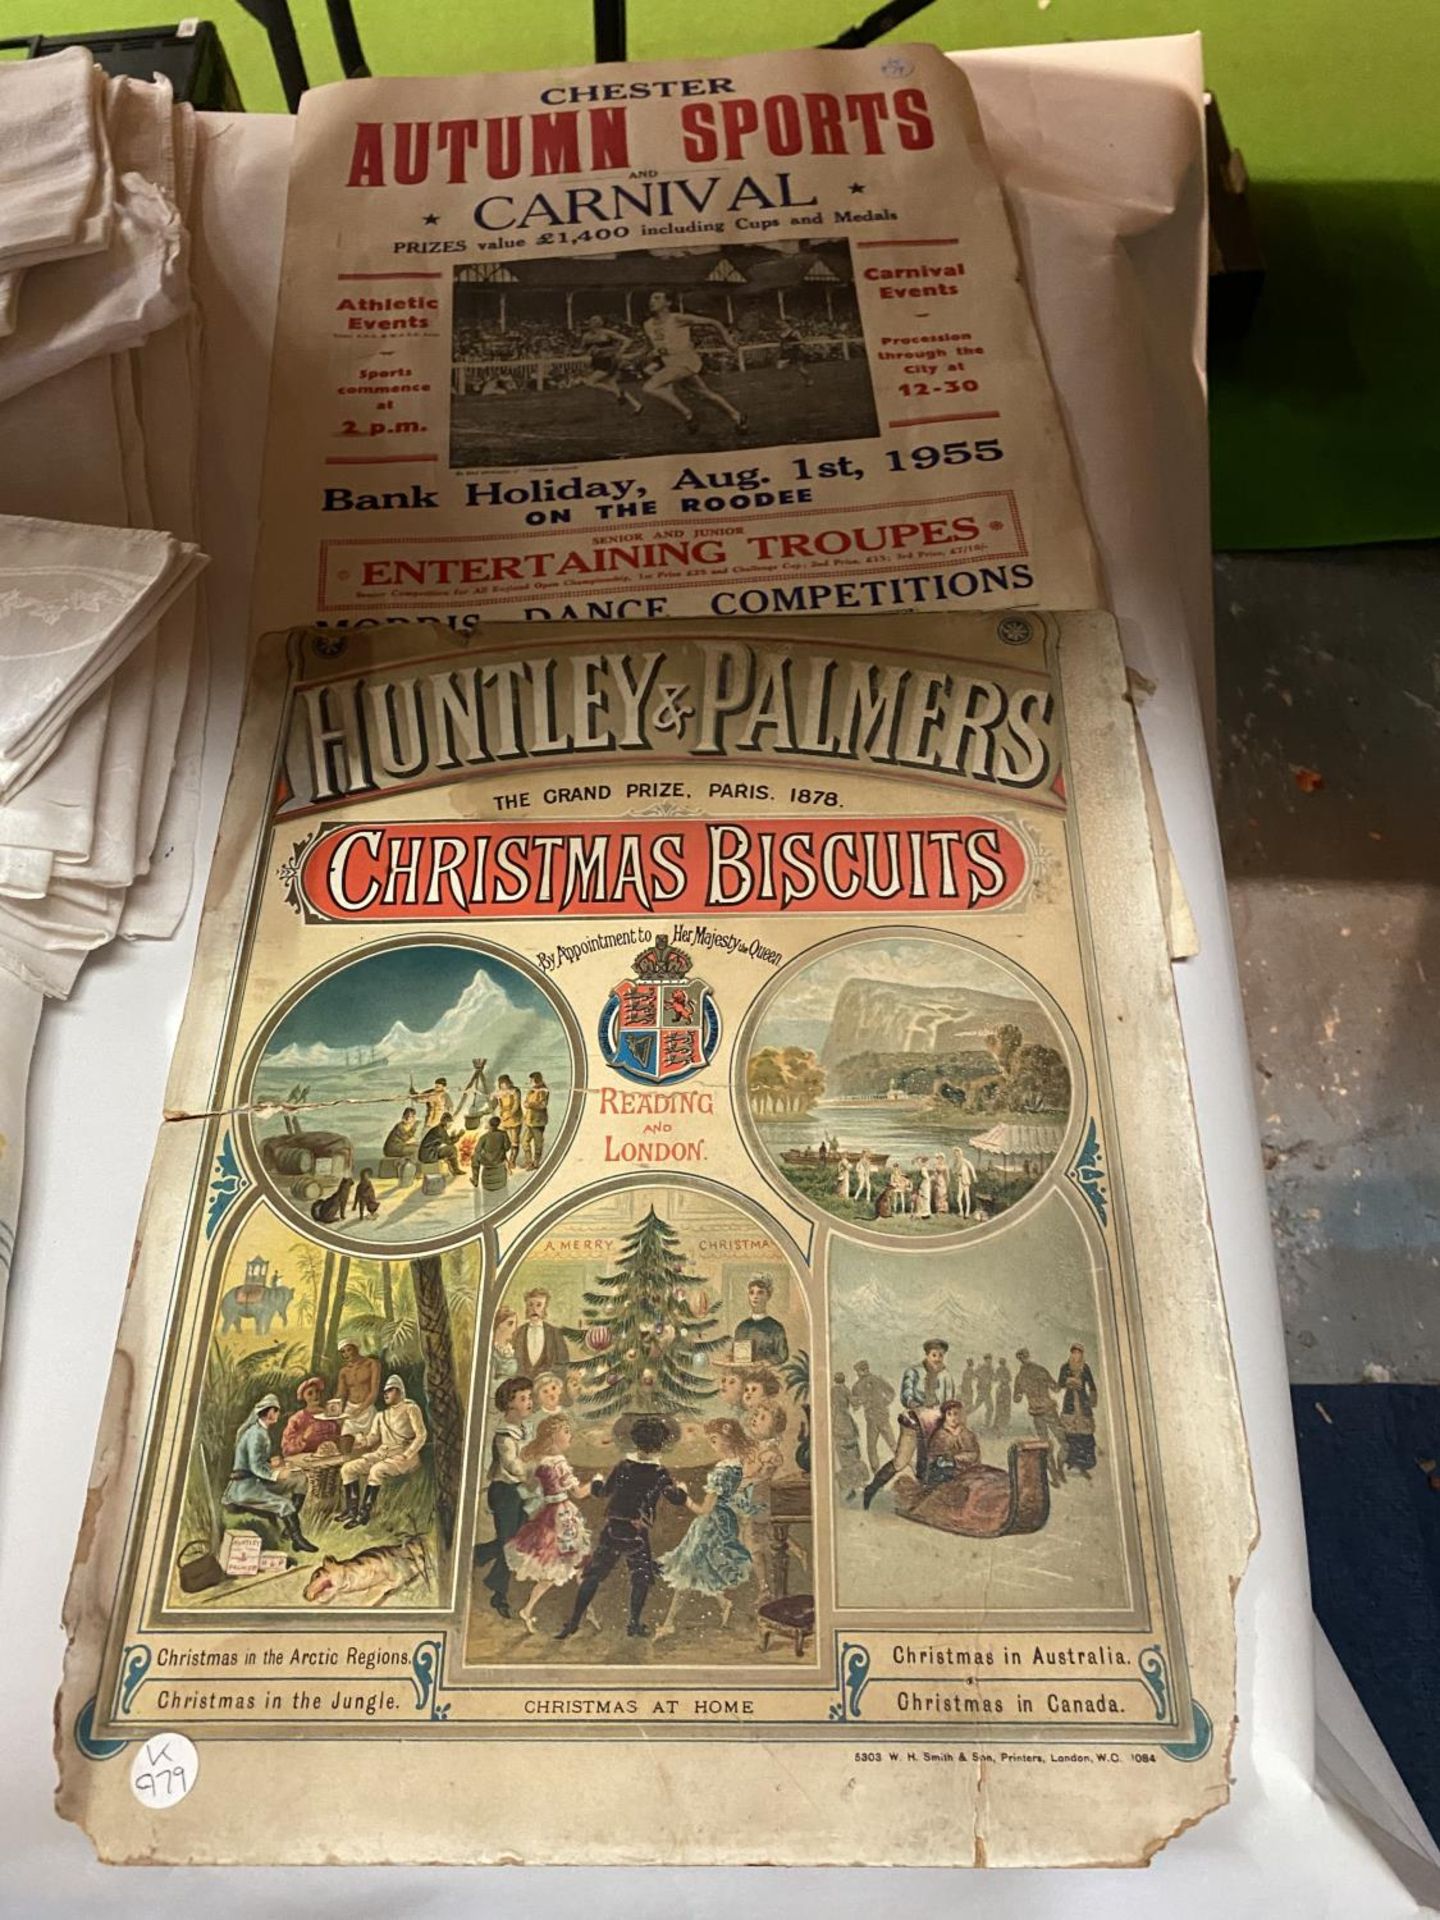 VARIOUS EPHEMERA TO INCLUDE CHESTER SPORTS CARNIVAL POSTER, HUNTLEY AND PALMERS ETC - Image 2 of 2